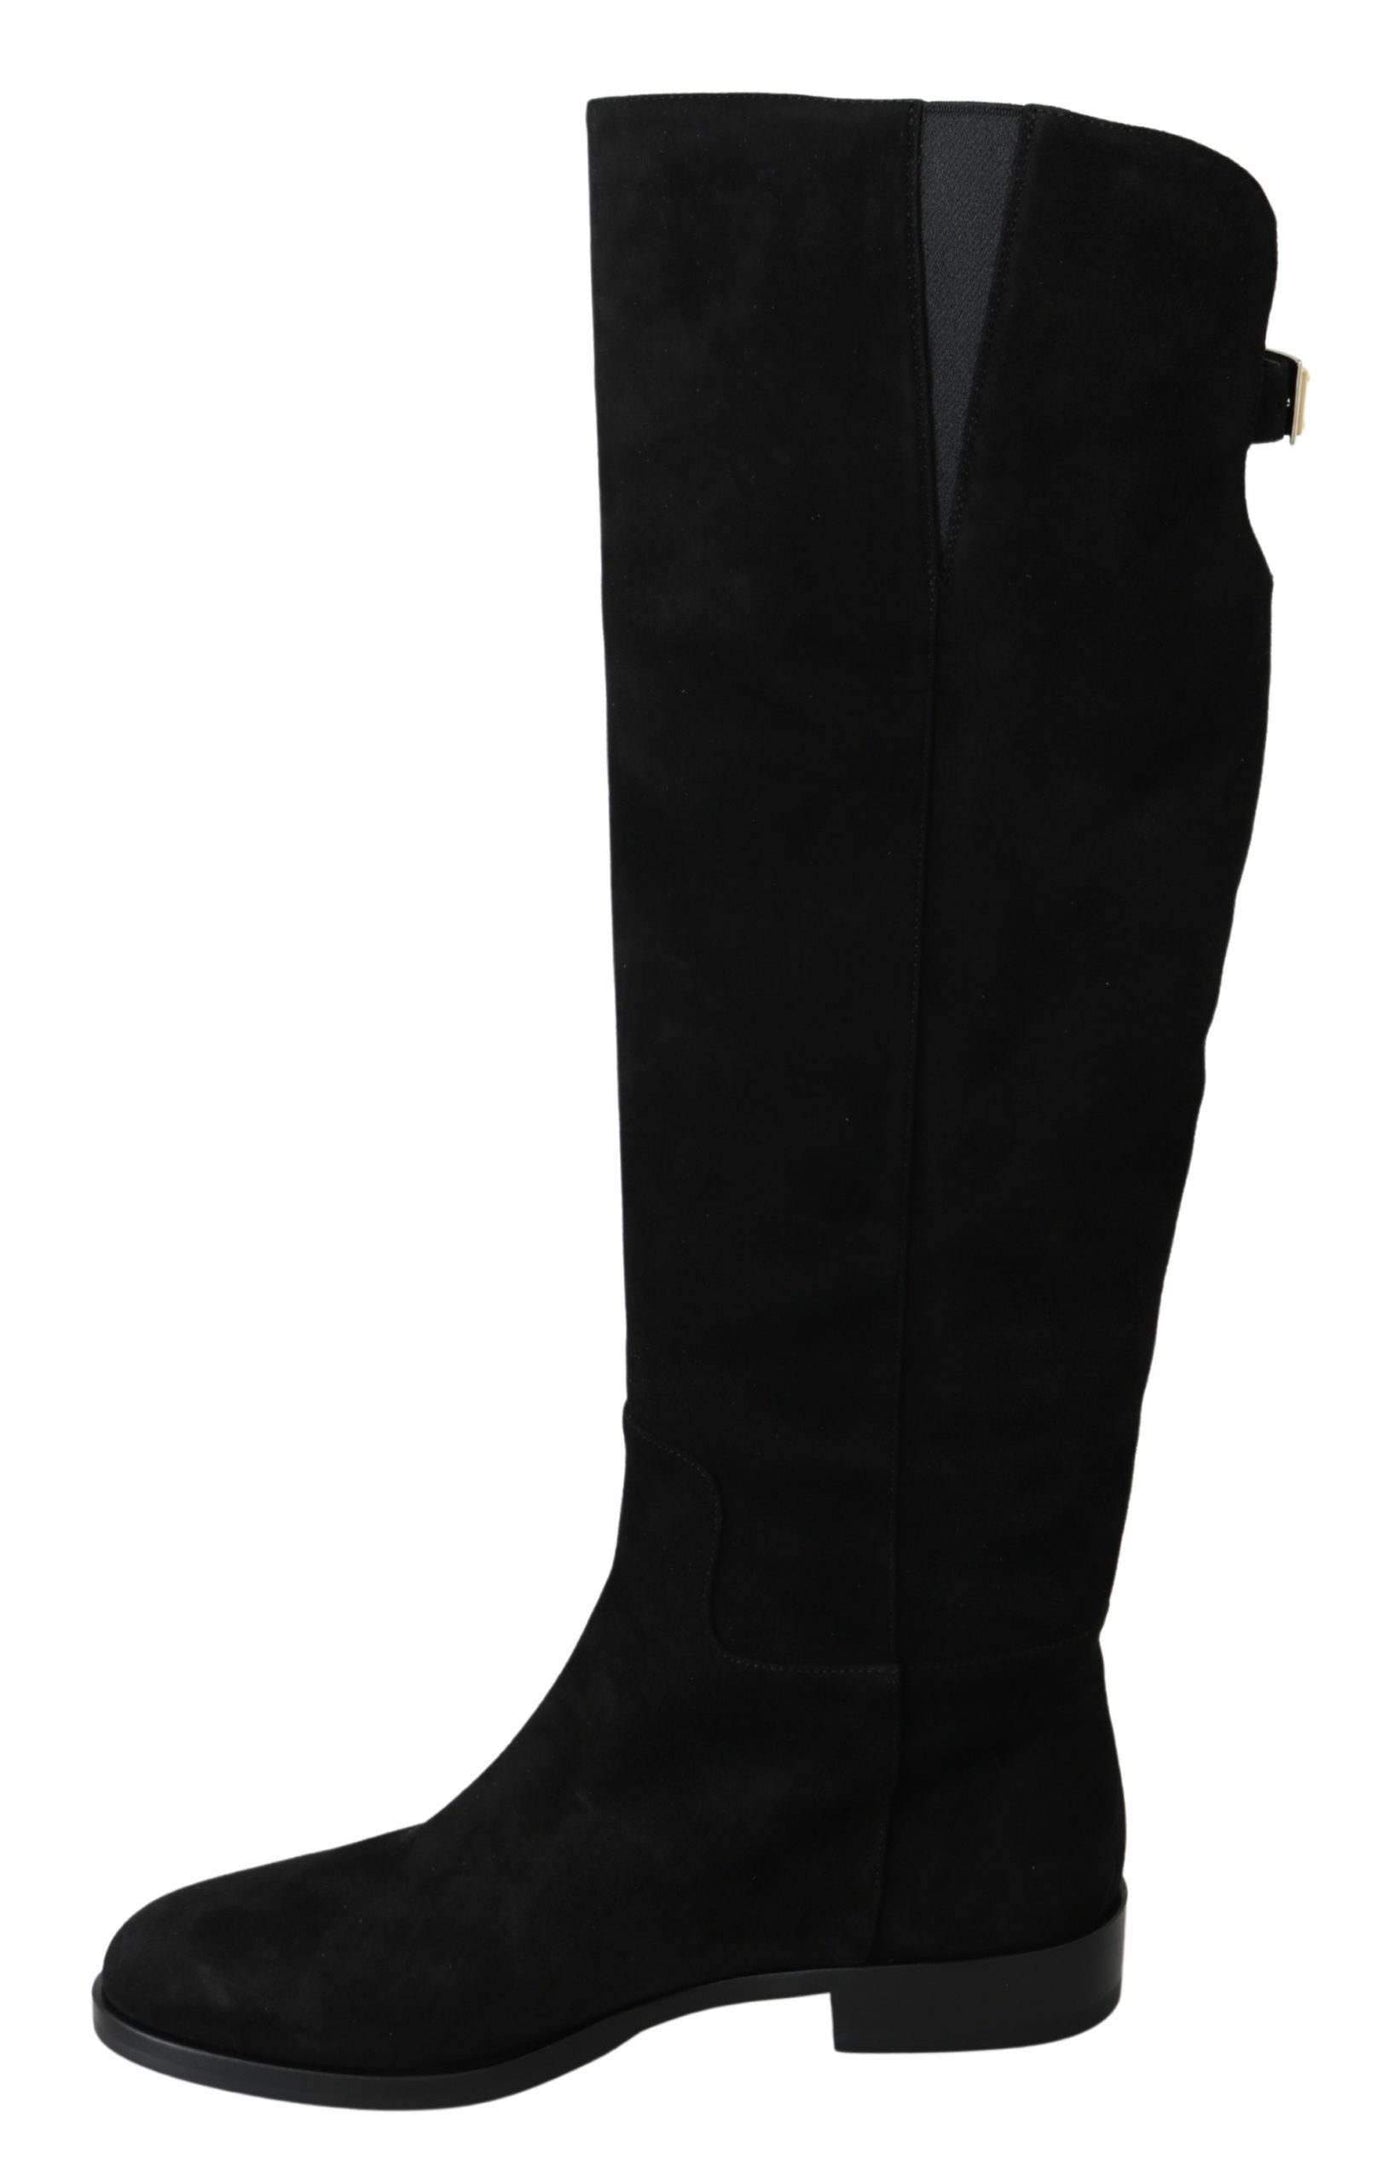 Dolce & Gabbana Black Suede Knee High Flat Boots Shoes #women, Black, Boots - Women - Shoes, Brand_Dolce & Gabbana, Dolce & Gabbana, EU38/US7.5, EU39/US8.5, feed-agegroup-adult, feed-color-black, feed-gender-female, feed-size-US10.5, Gender_Women, Shoes - New Arrivals at SEYMAYKA